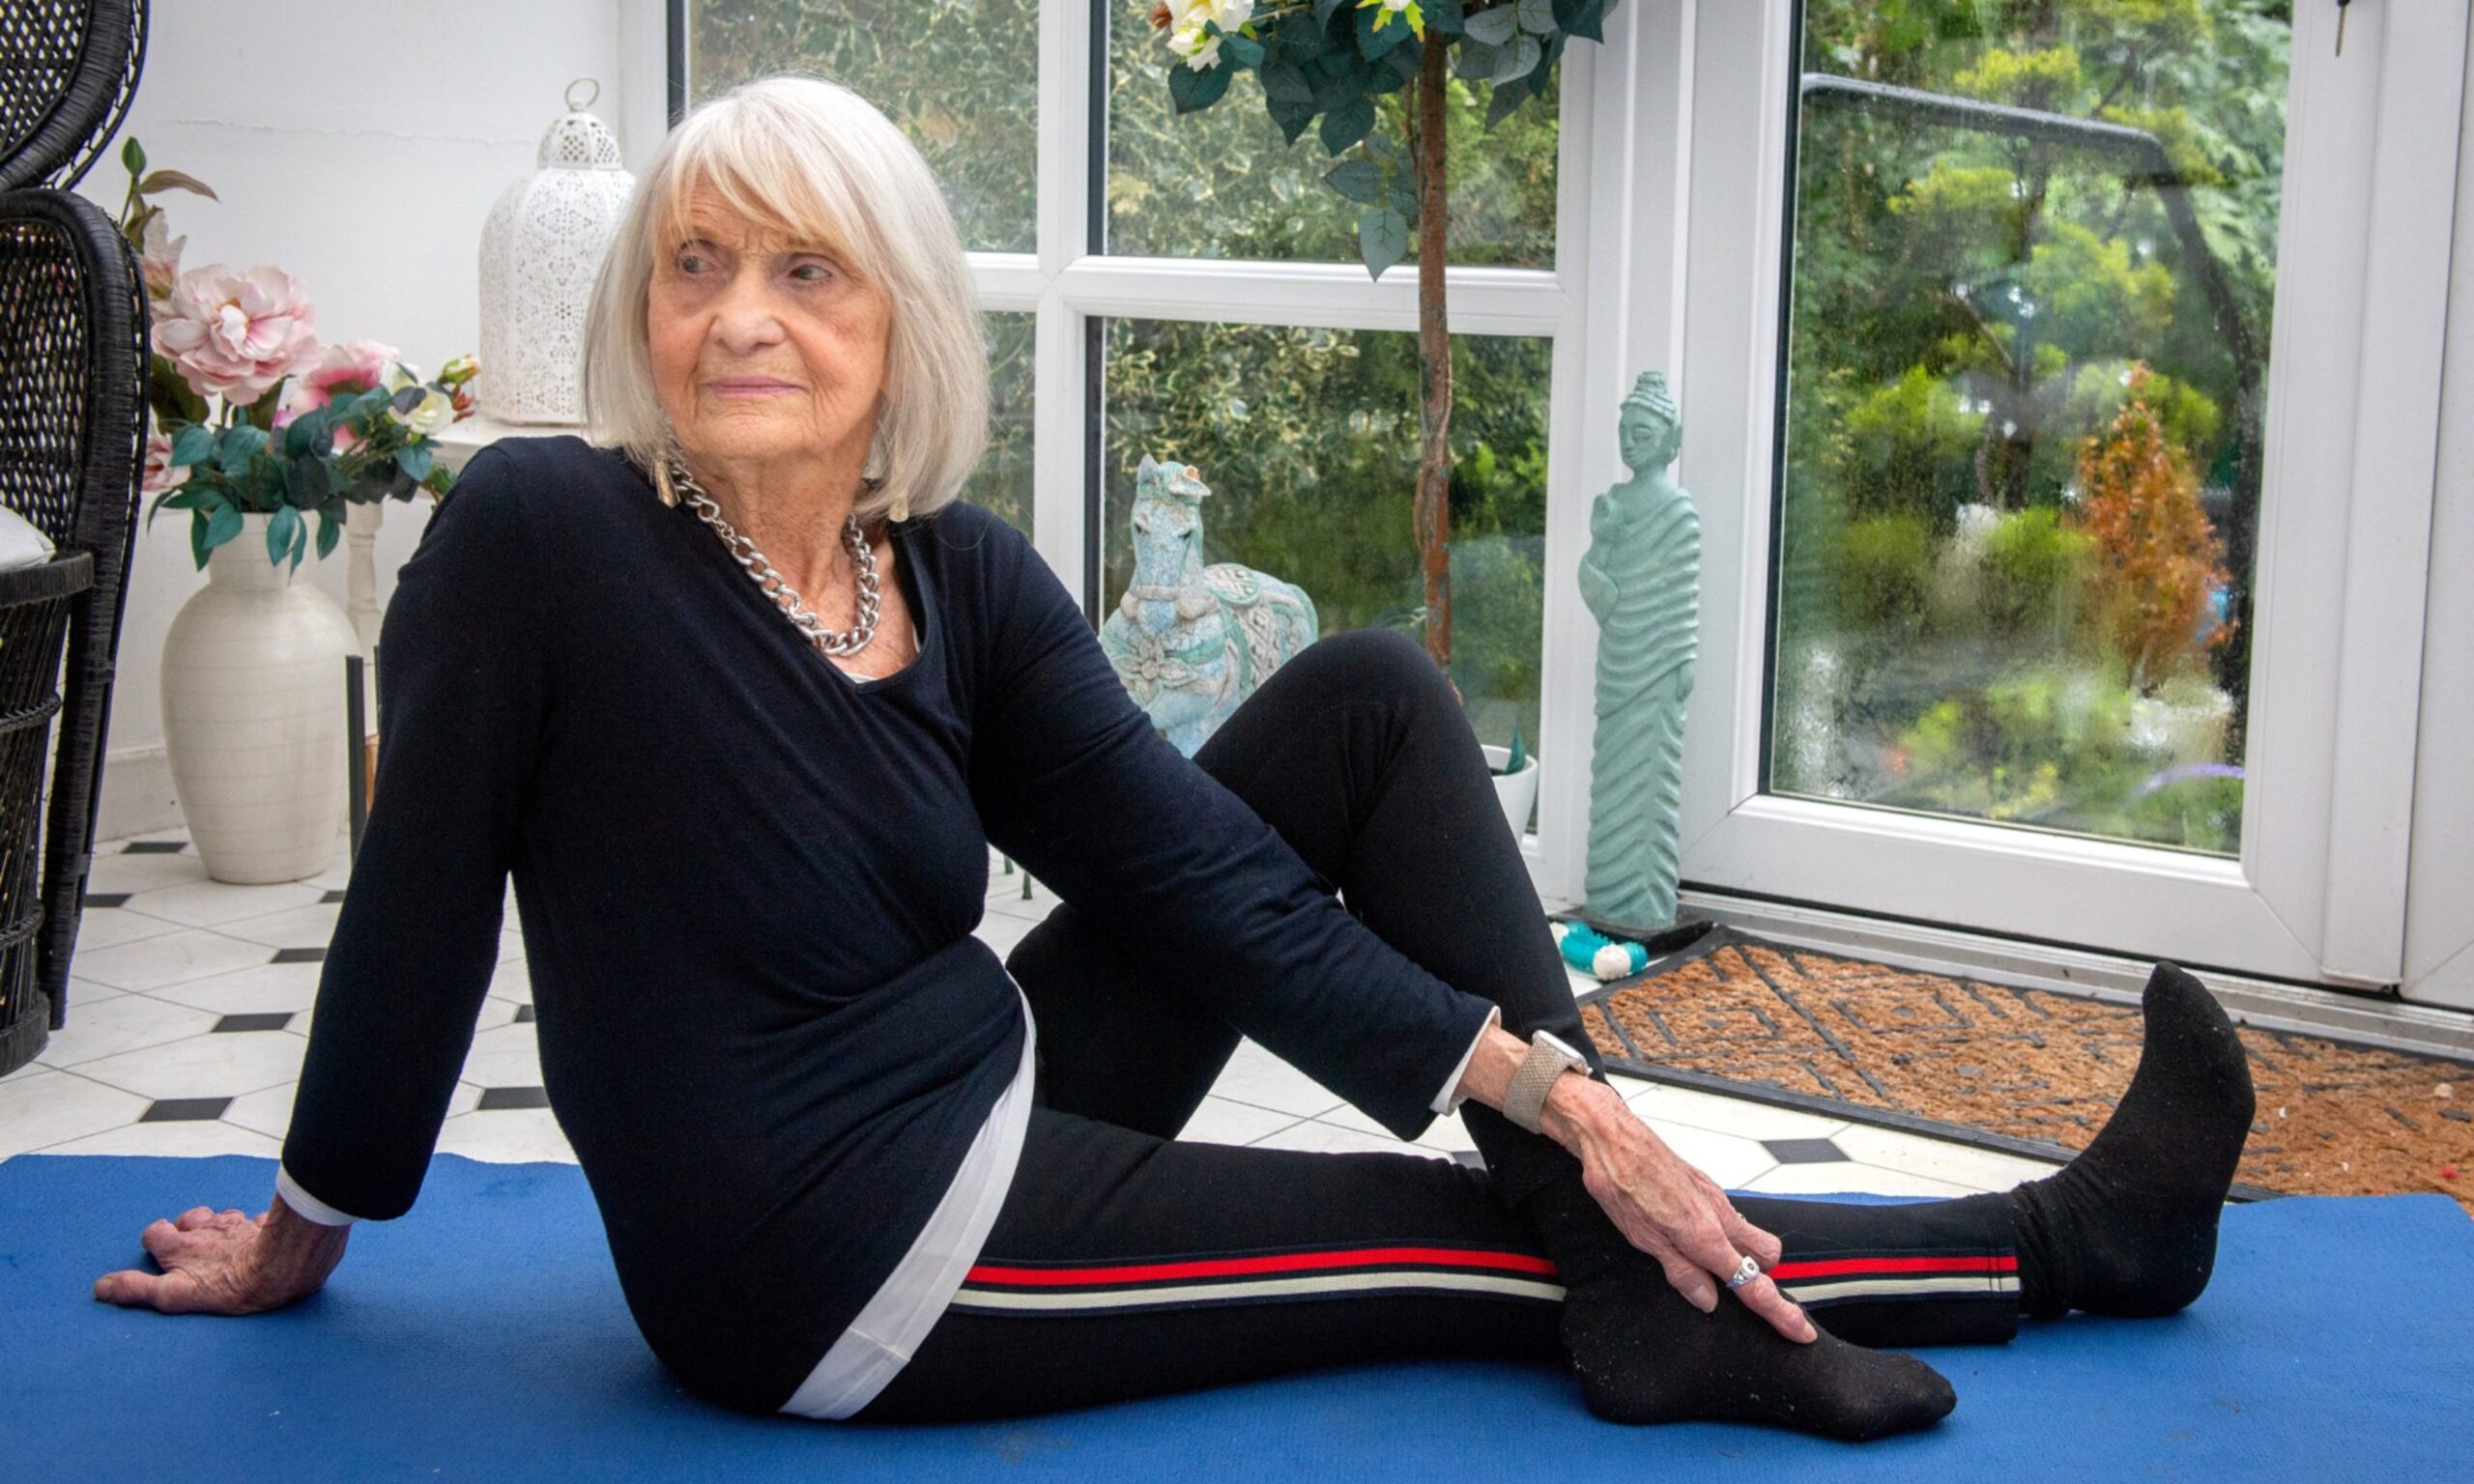 Jeane Christison, who runs yoga exercise classes in aberdeen